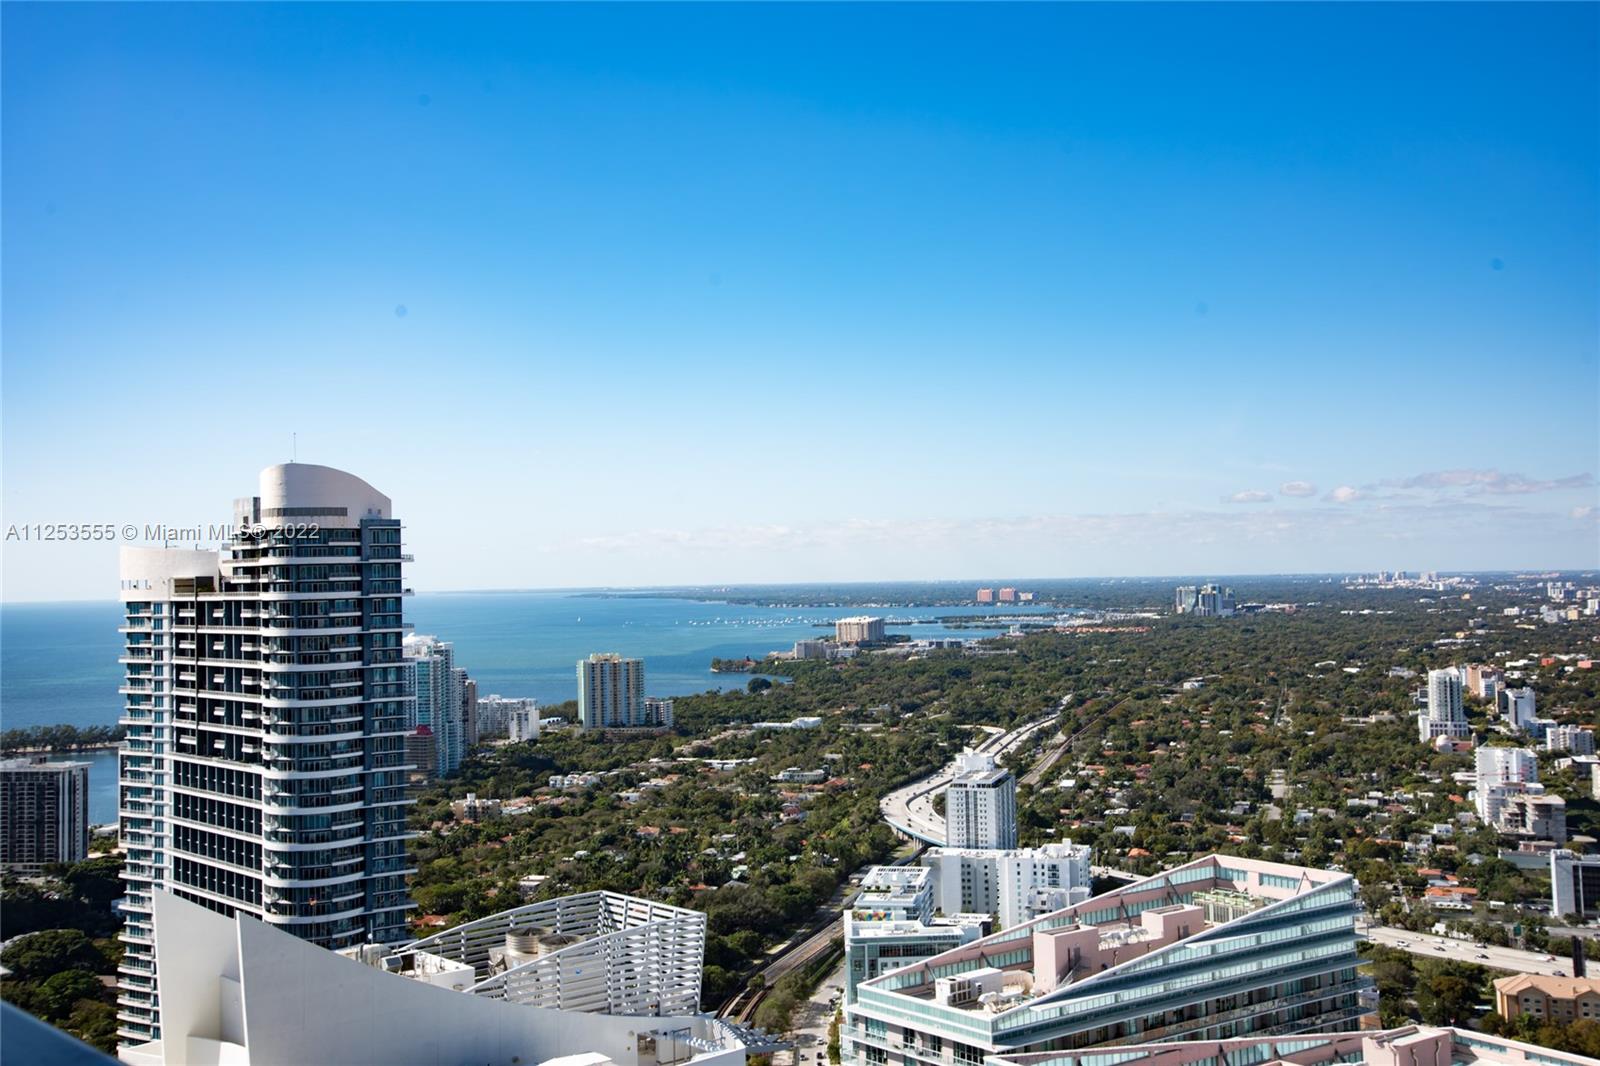 Located in the heart of Downtown Miami. Brickell Flatiron is ideally situated within walking distance of Mary Brickell Village, Brickell City Center and so much more! Brickell Flatiron is the most sought-after residences. This unit features panoramic sunsets, elite amenities, you will experience the benefits of unsurpassed convenience and luxury.